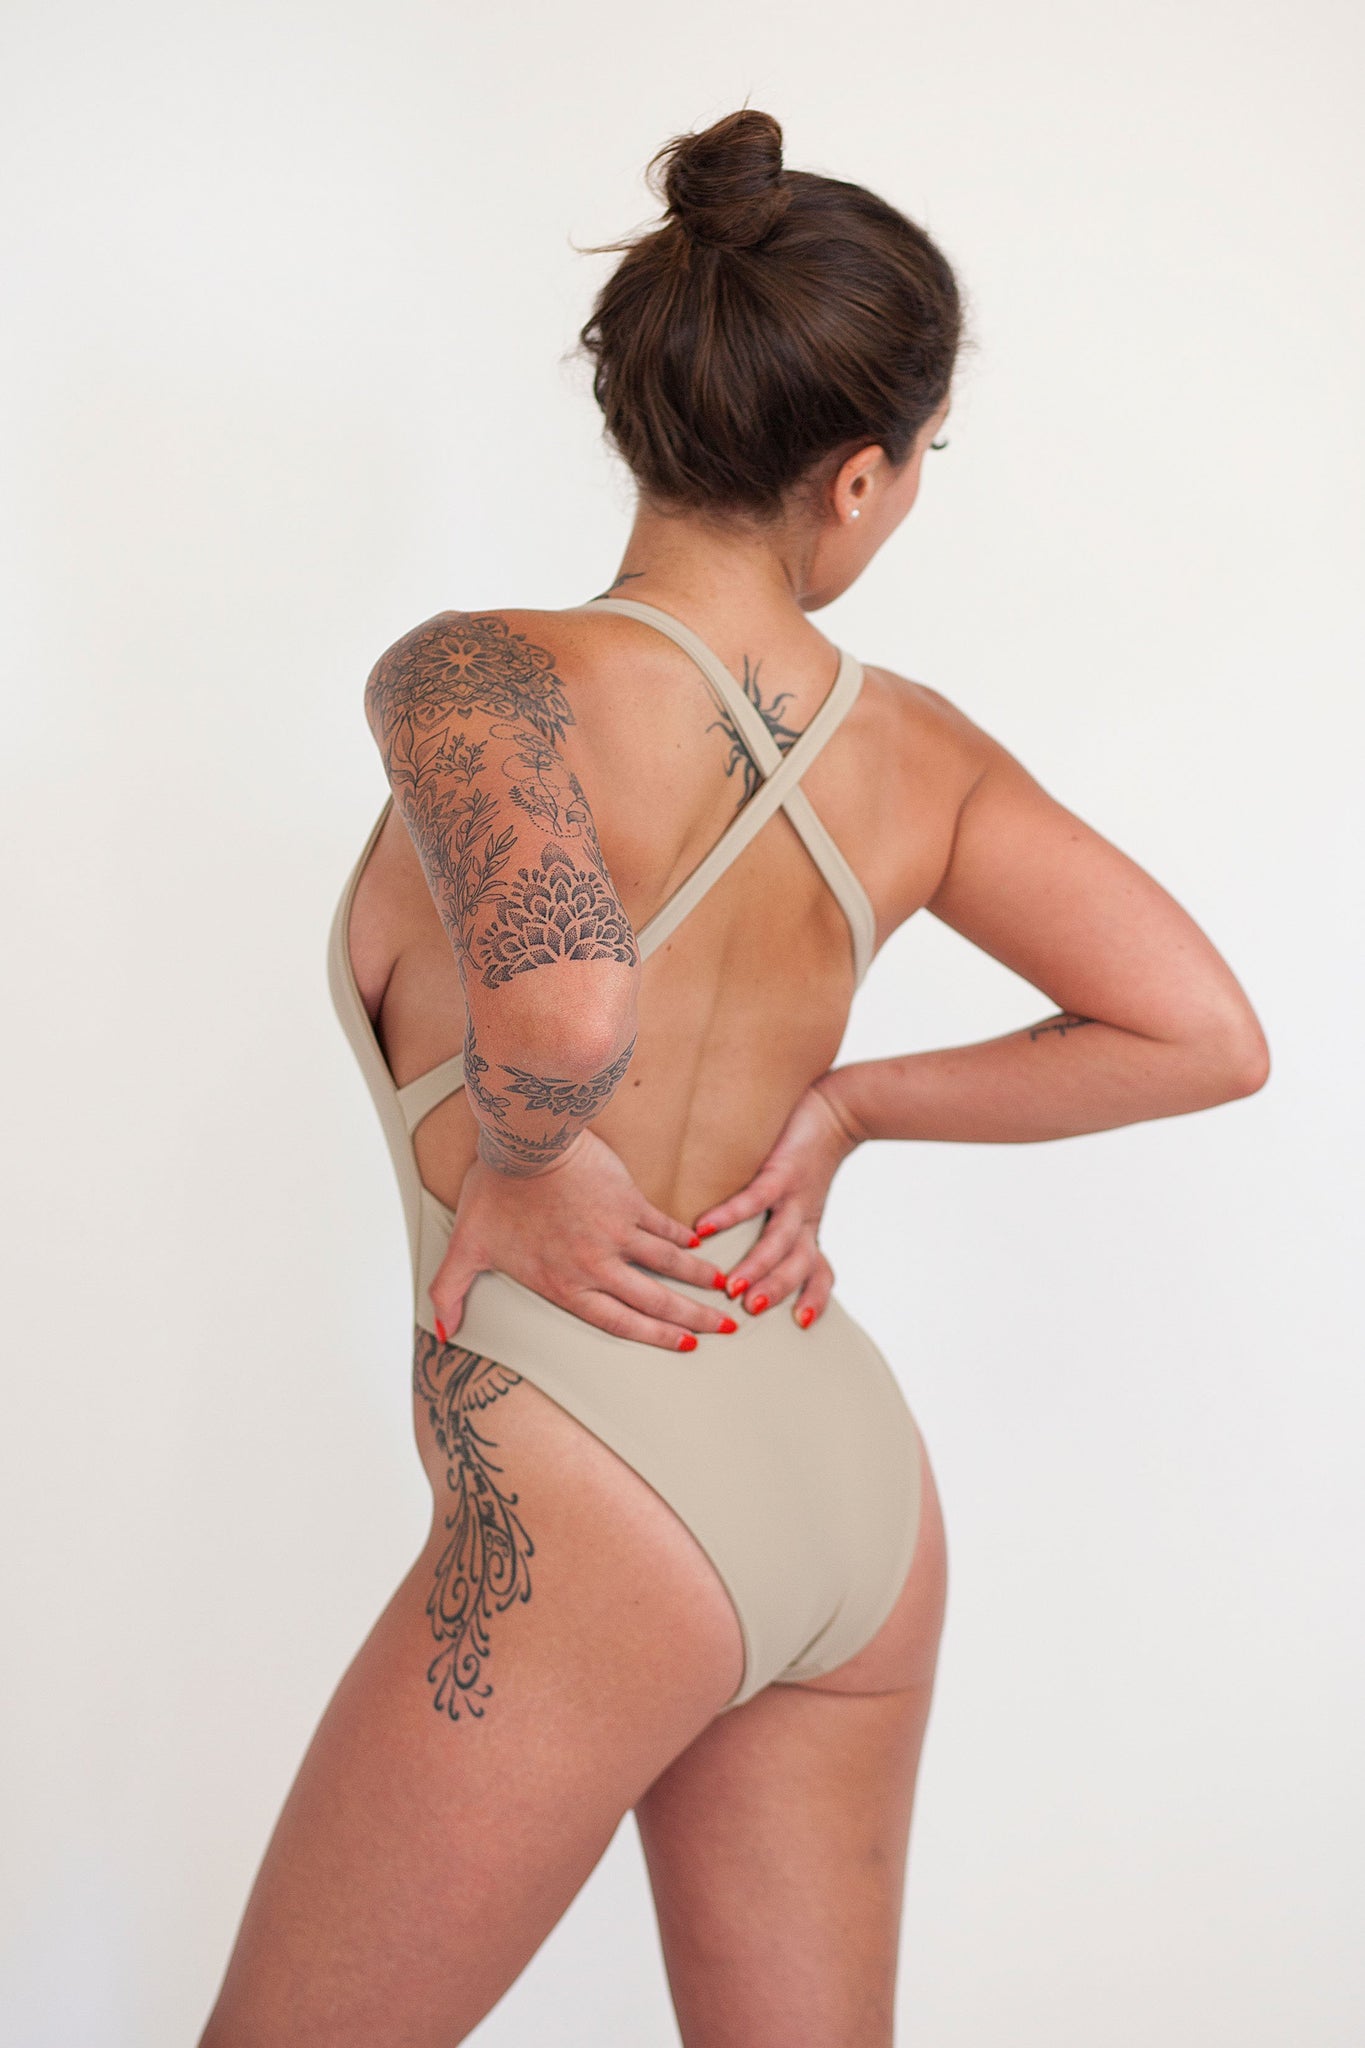 The back of a woman standing with her hands on her hips wearing a nude one piece swimsuit with criss-crossed straps.